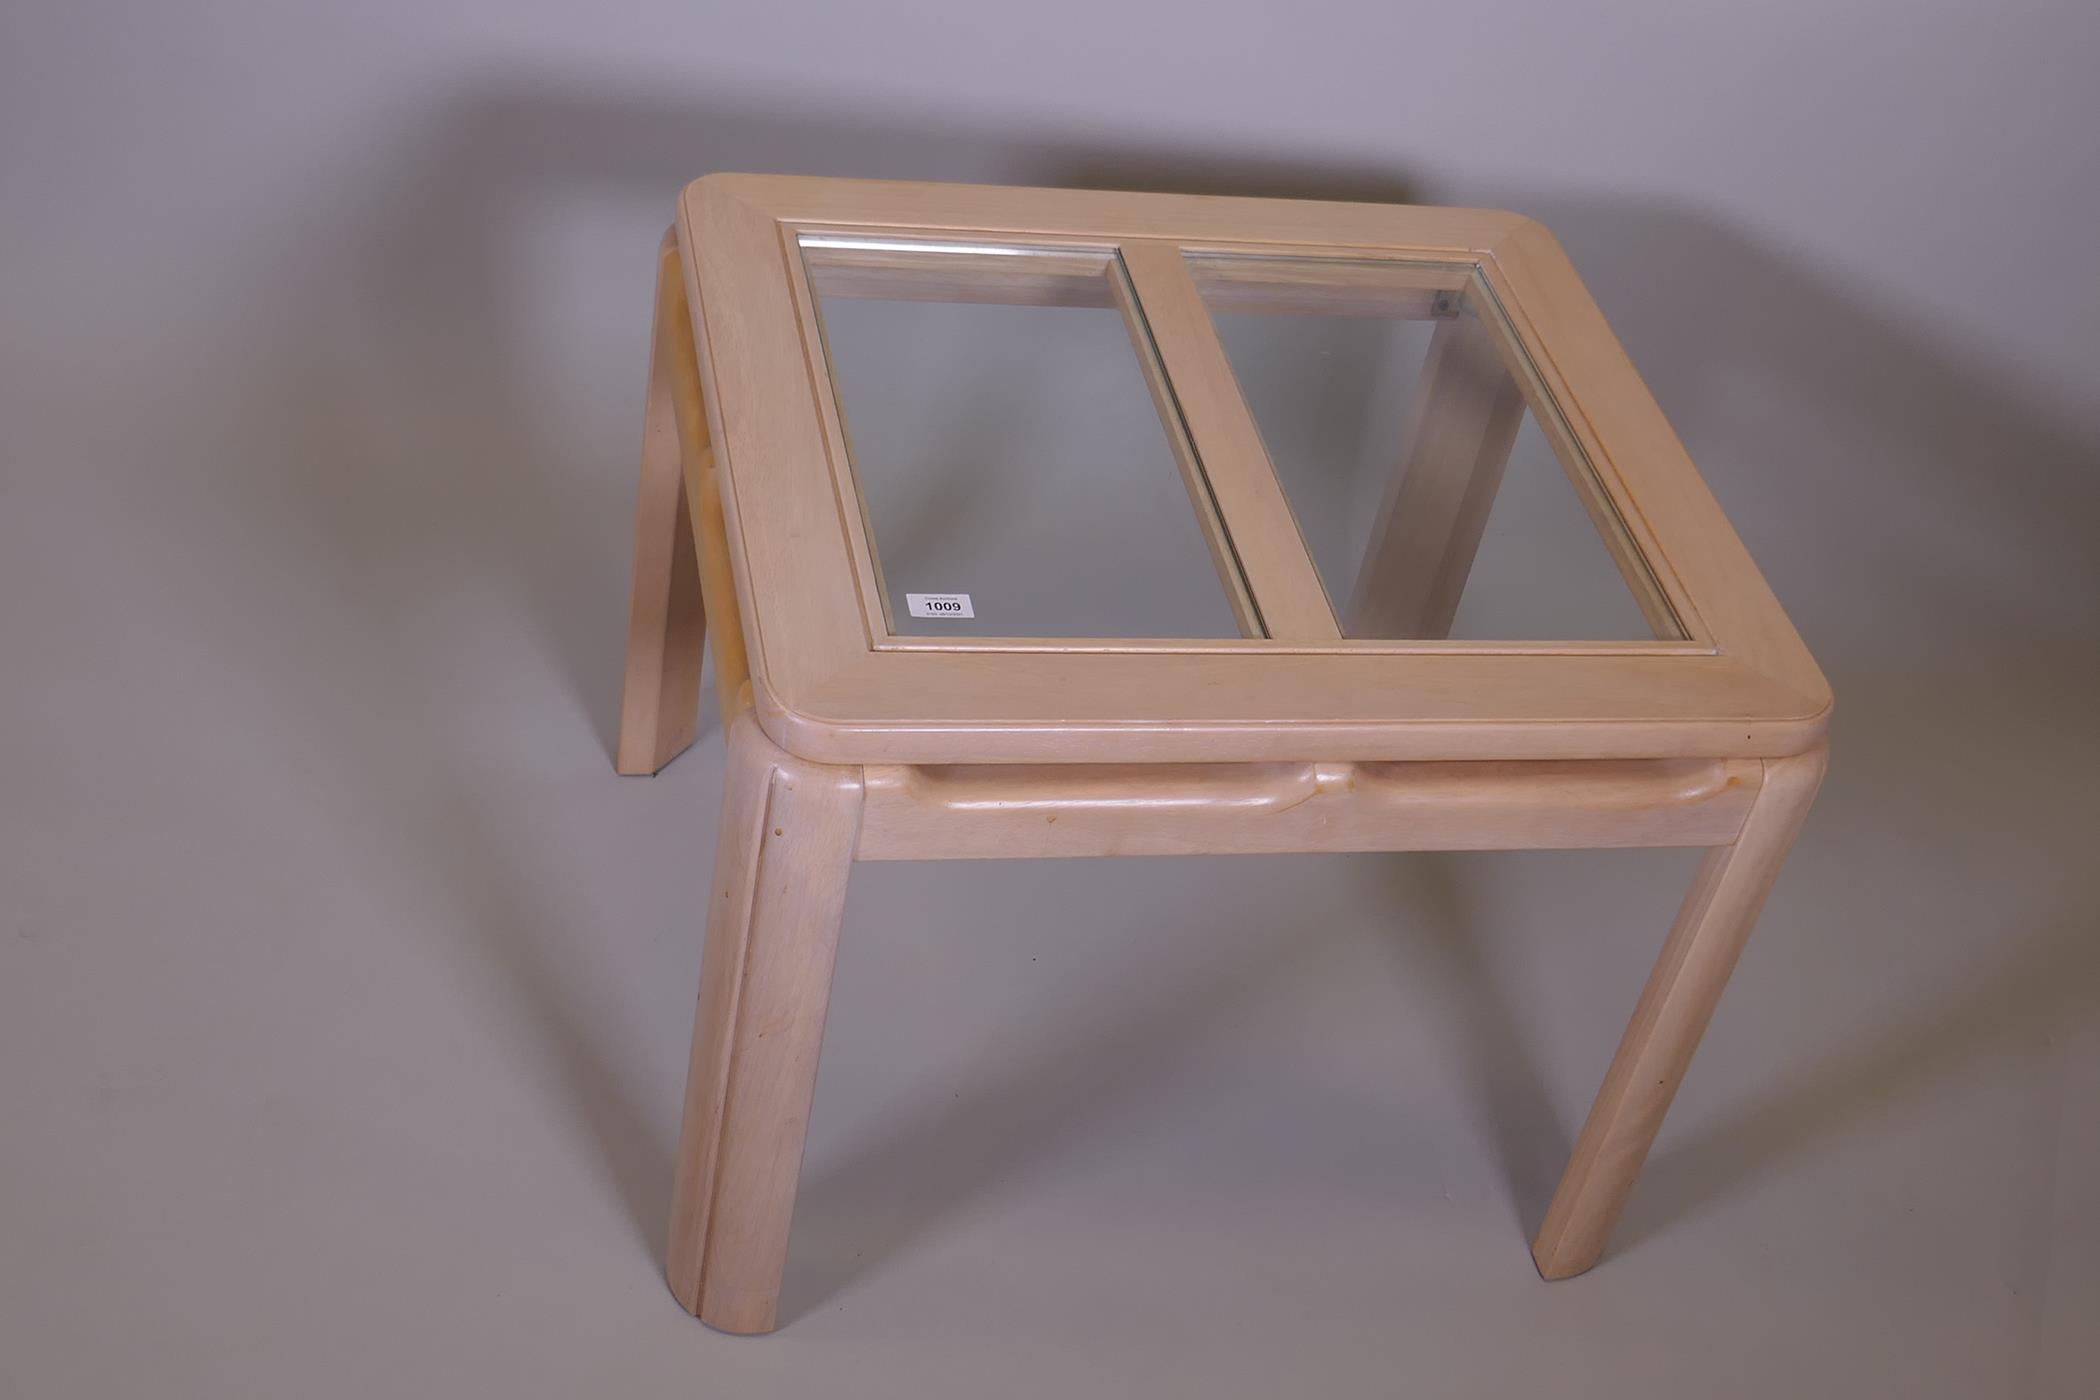 A contemporary blonde beechwood coffee table with inset glass top, 27" x 27" x 21" - Image 2 of 2